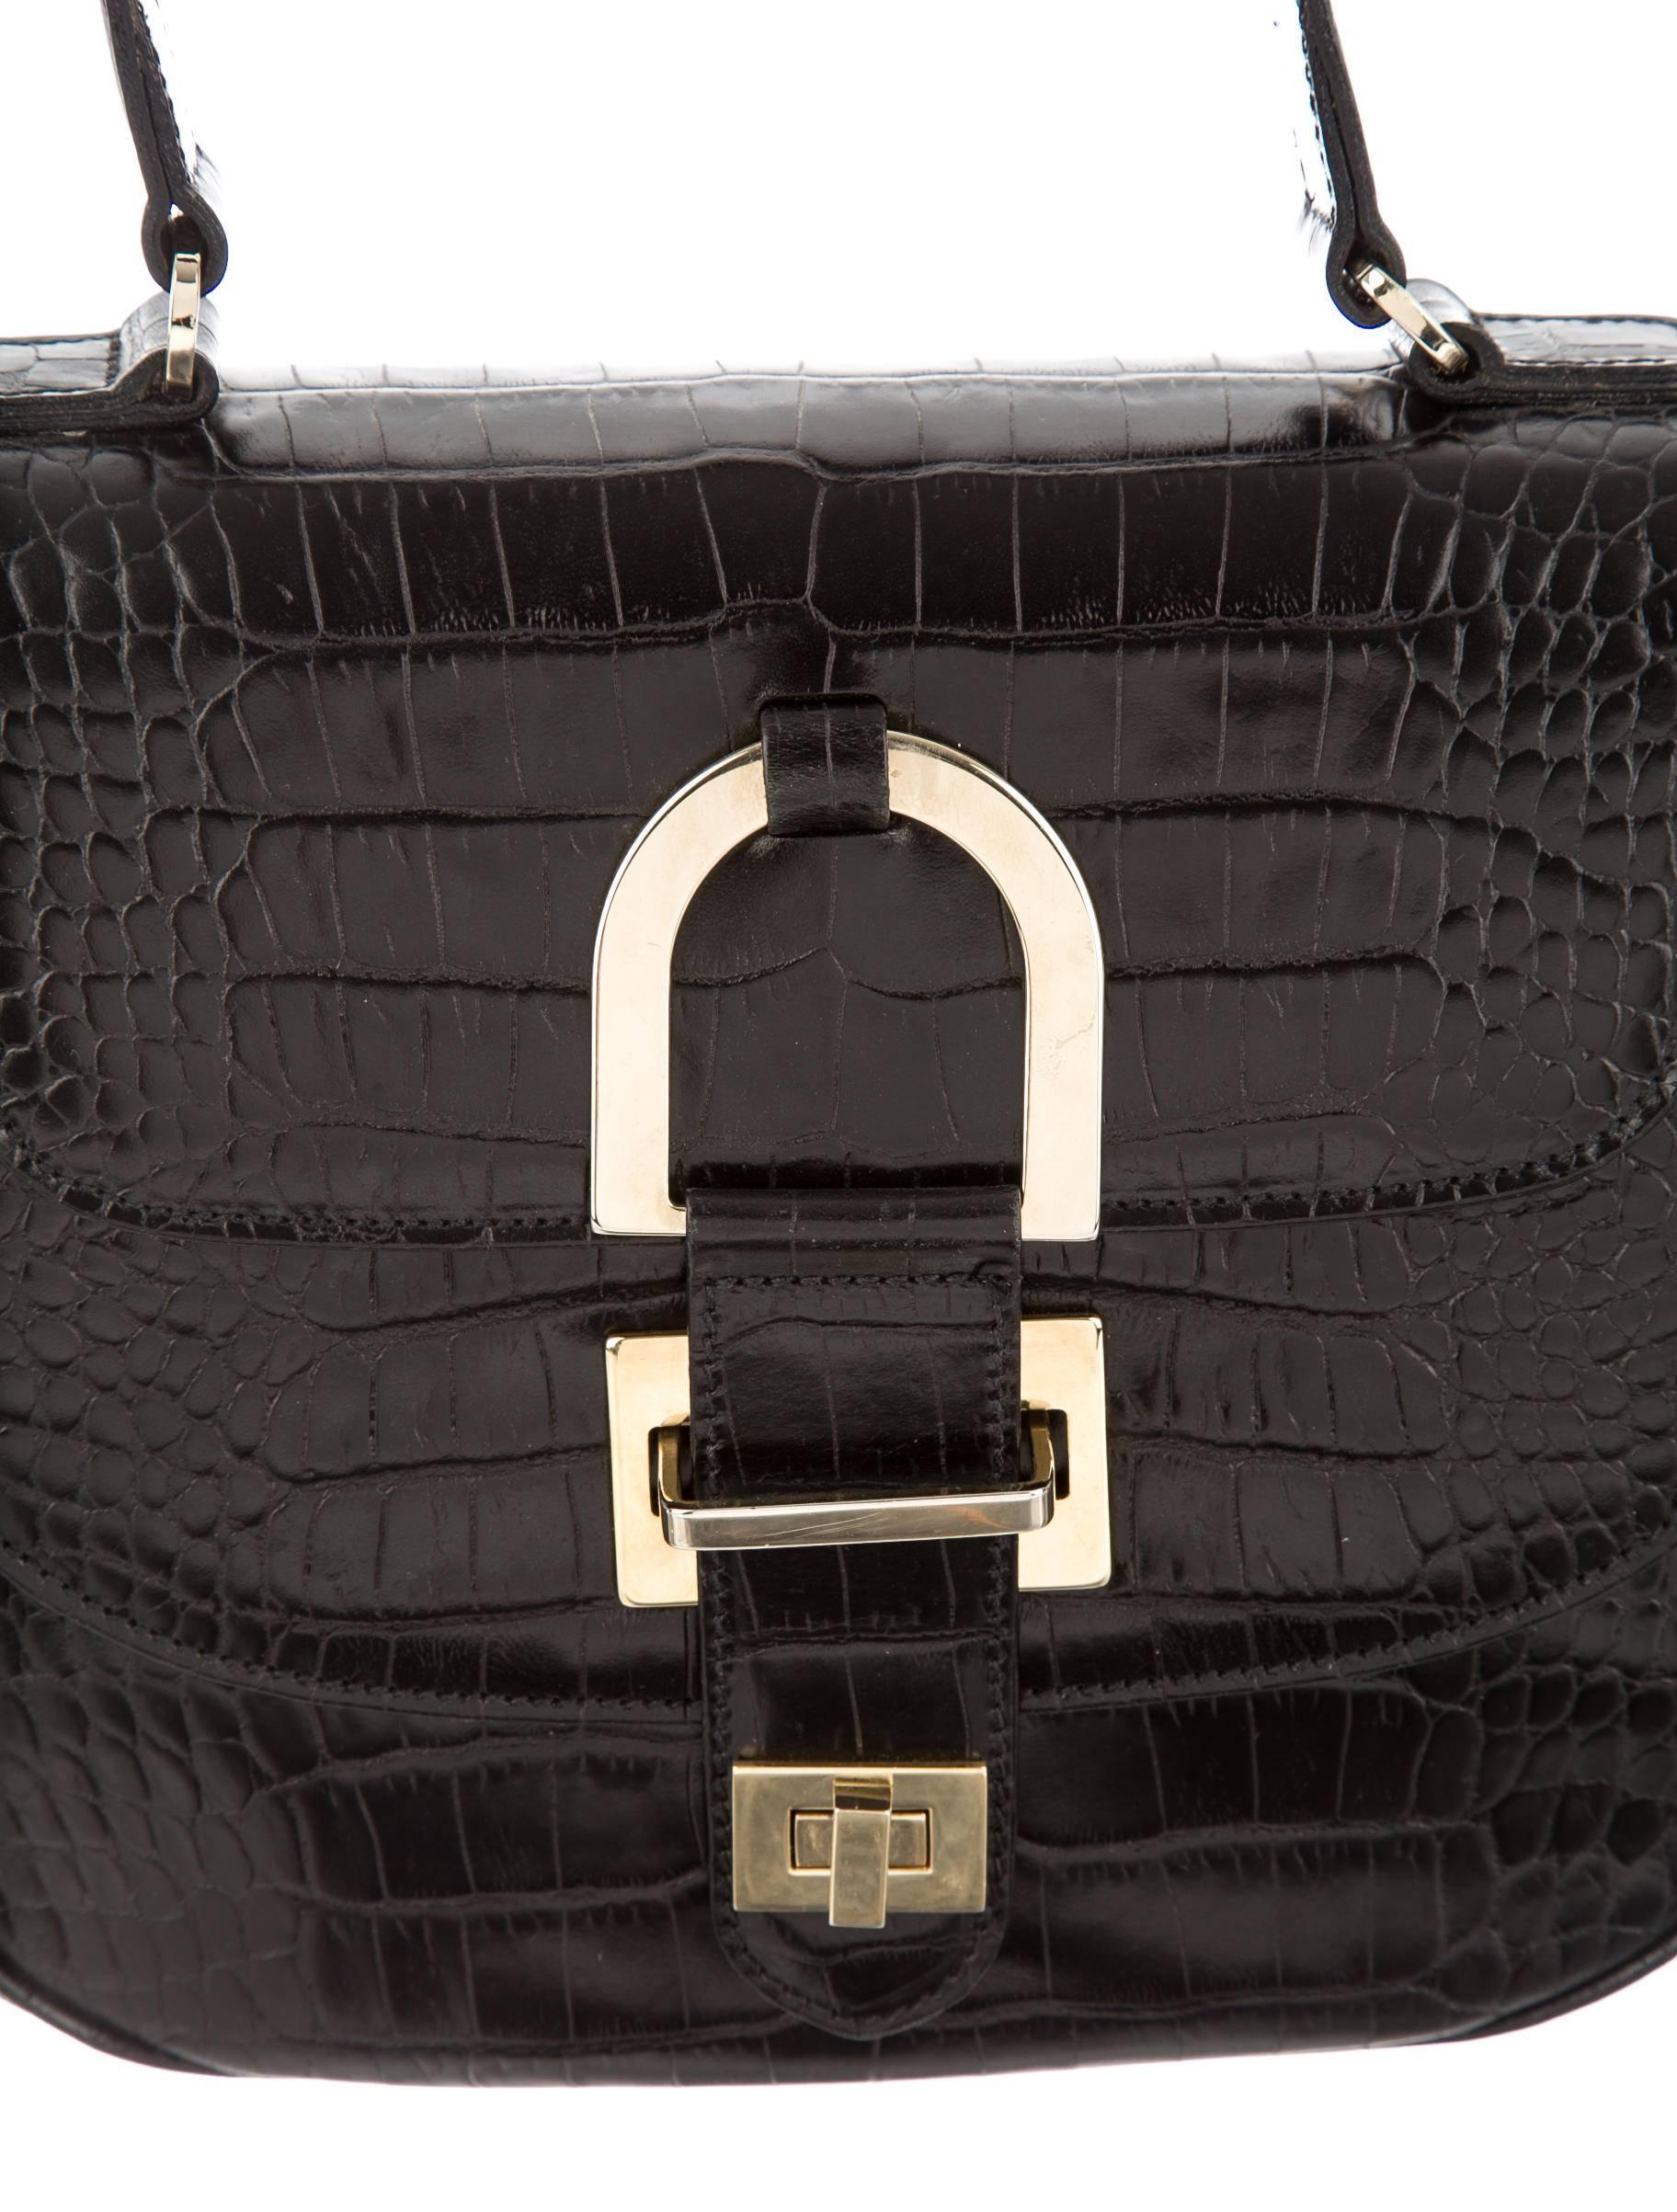 CURATOR'S NOTES

WOW! INCREDIBLE PRICE REDUCTION THIS WEEKEND ONLY!

Own a piece of history with this stunning black alligator top handle satchel bag by the late, great Oscar de la Renta.

Estimated value $20,000
Alligator
Gold